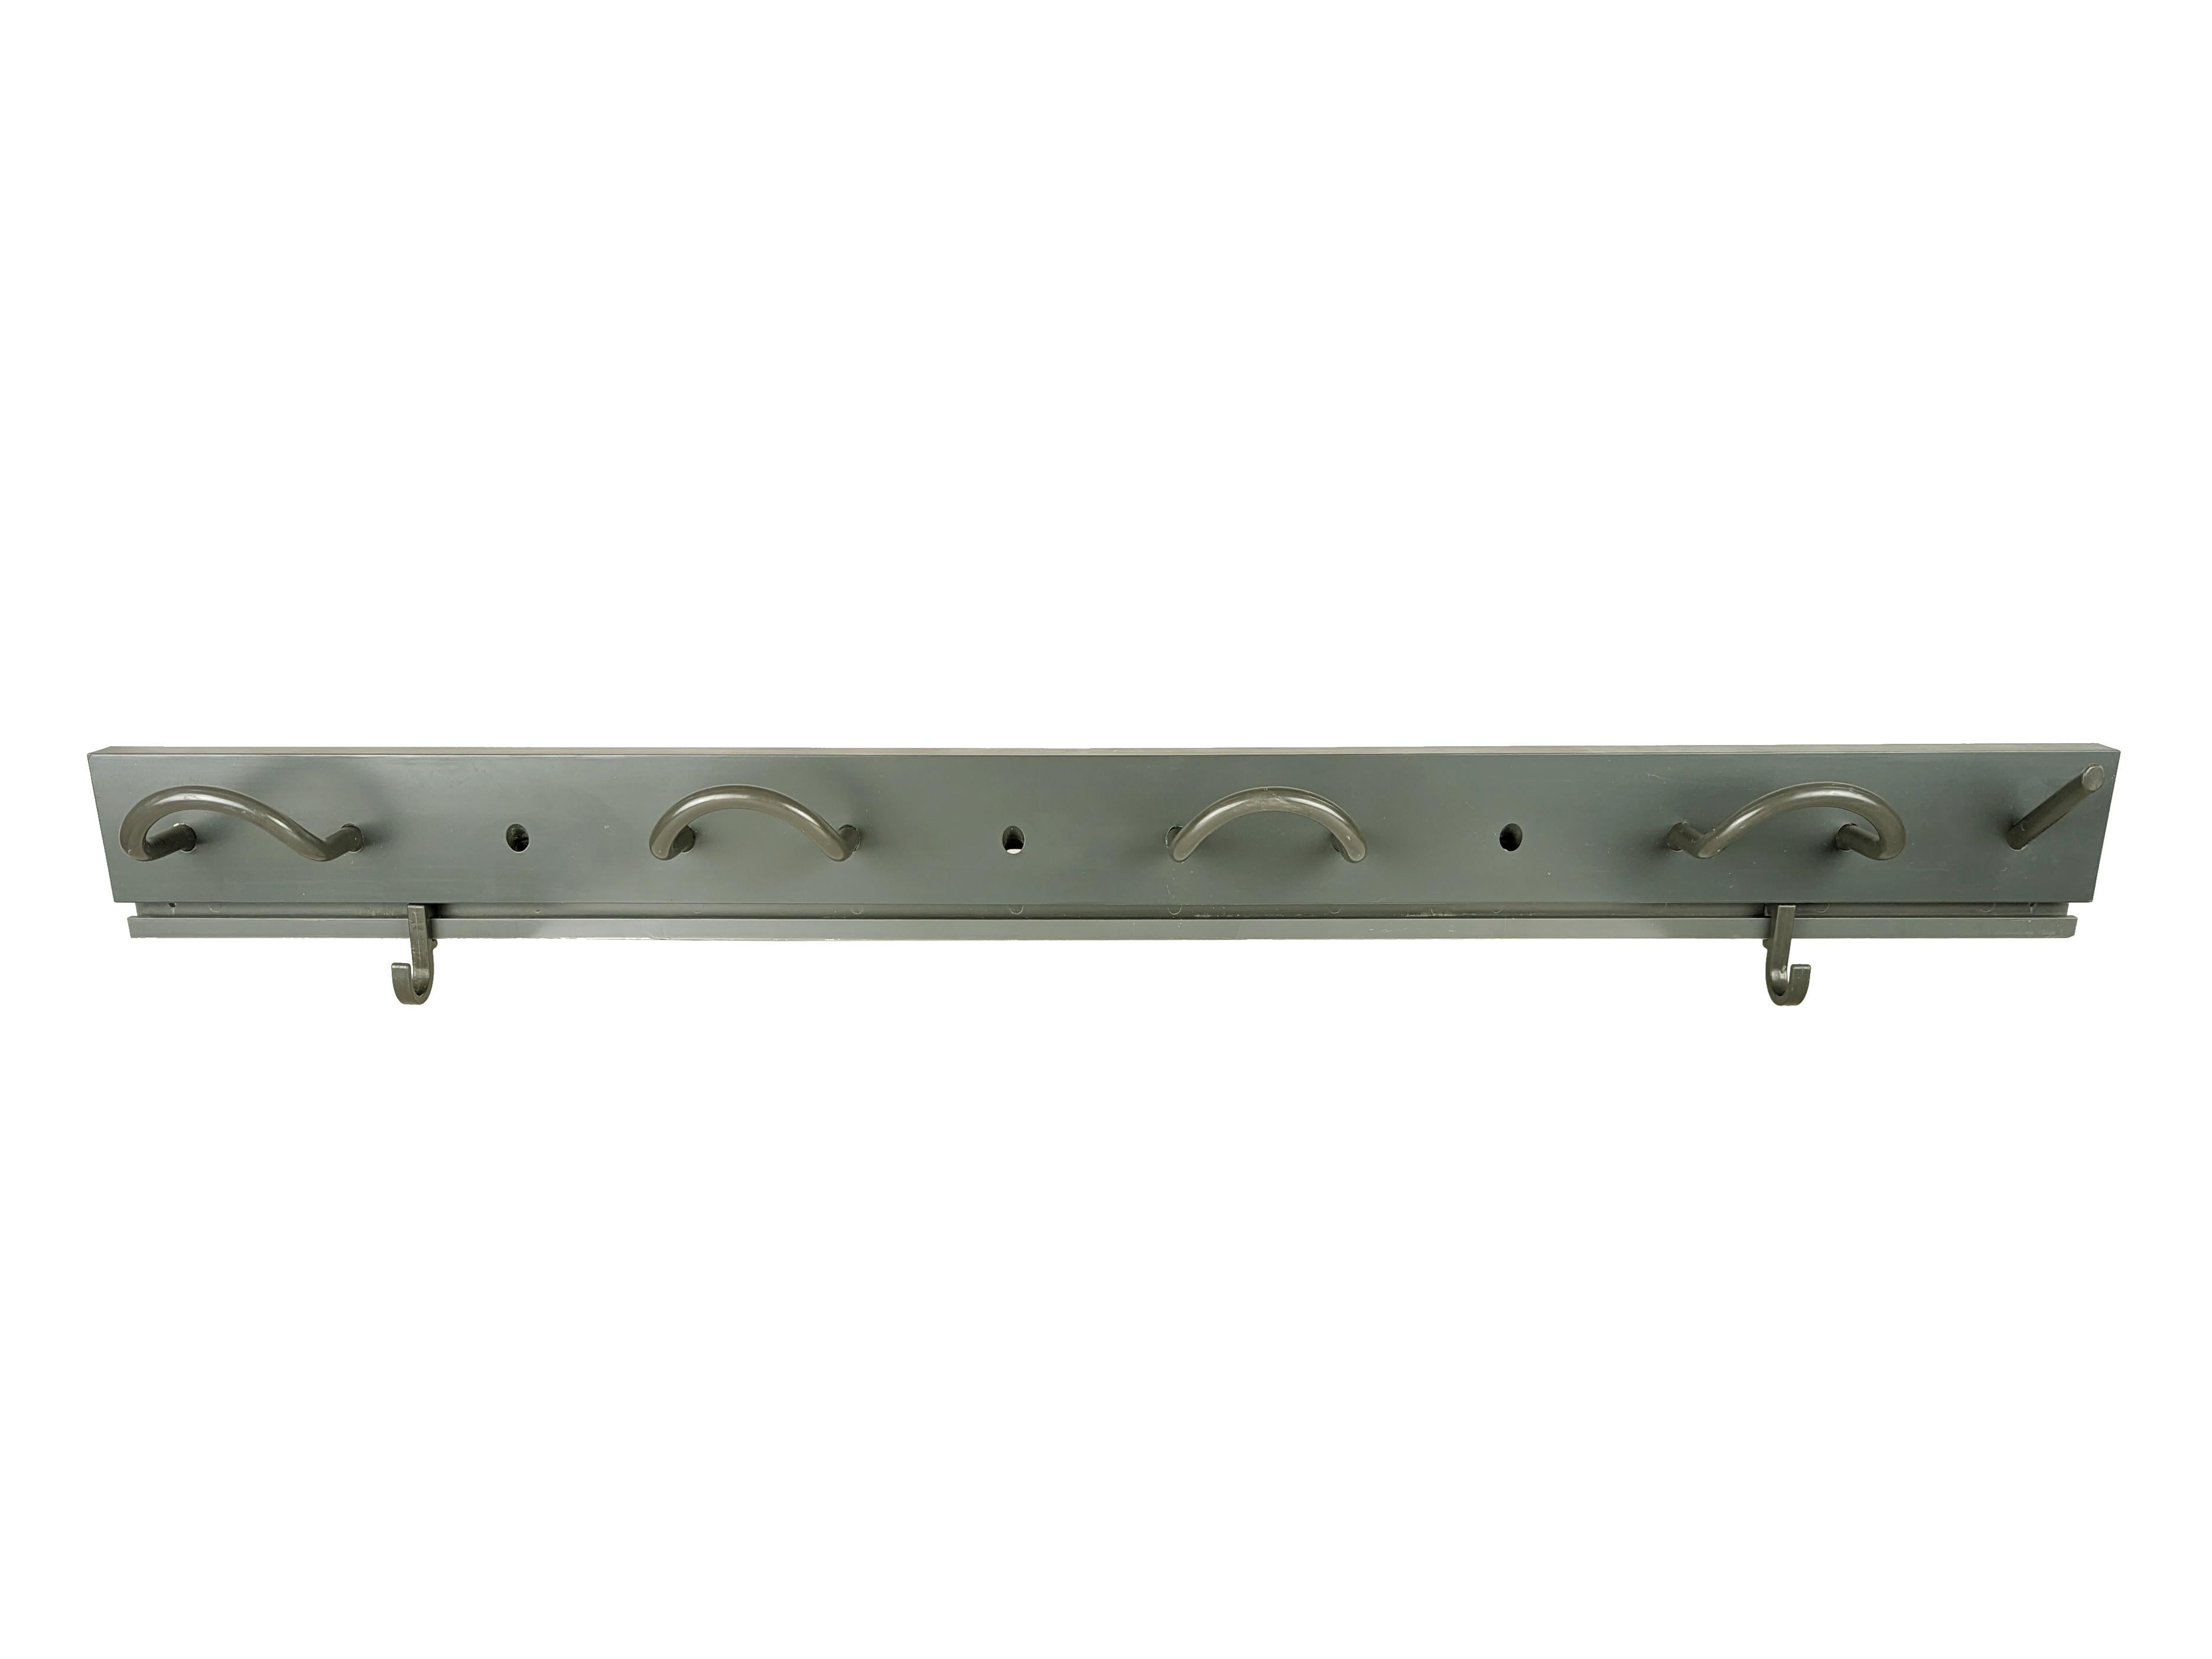 Grey plastic coat rack with several hooks produced by Kartell in the 1980s. The hooks can be positioned in different positions according to needs.